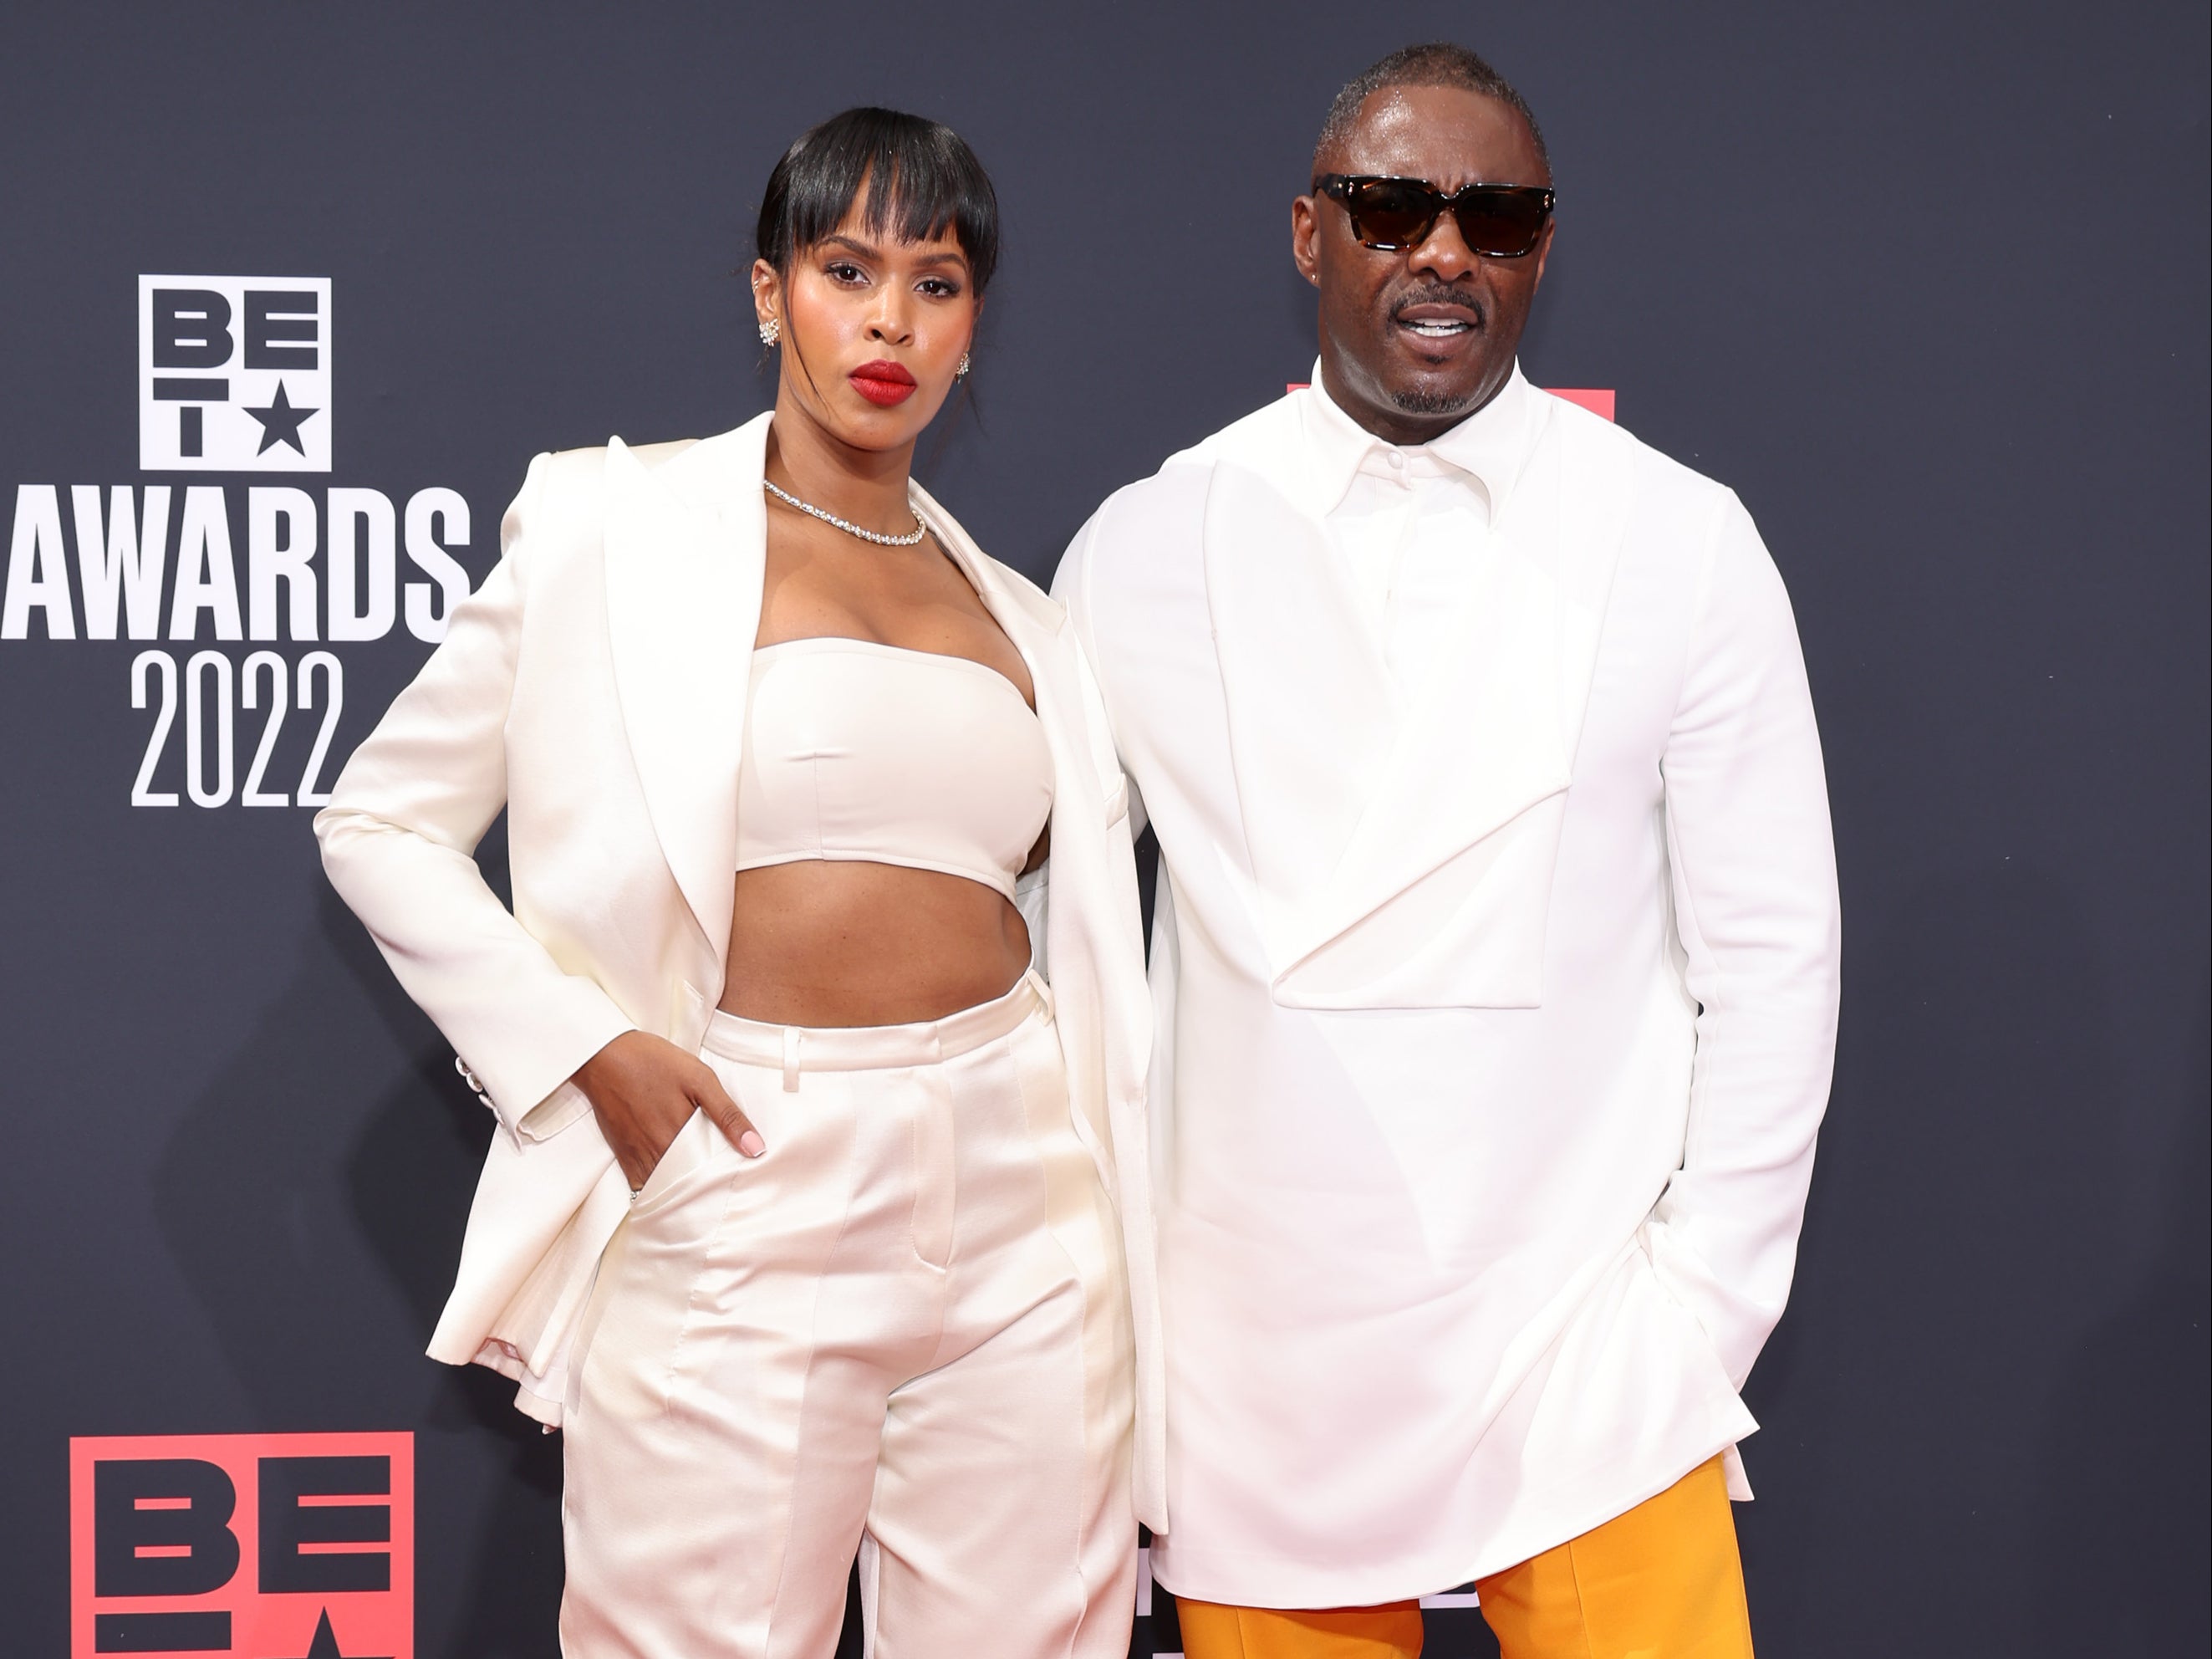 Sabrina Dhowre and Idris Elba attend the 2022 BET Awards at Microsoft Theater on June 26, 2022